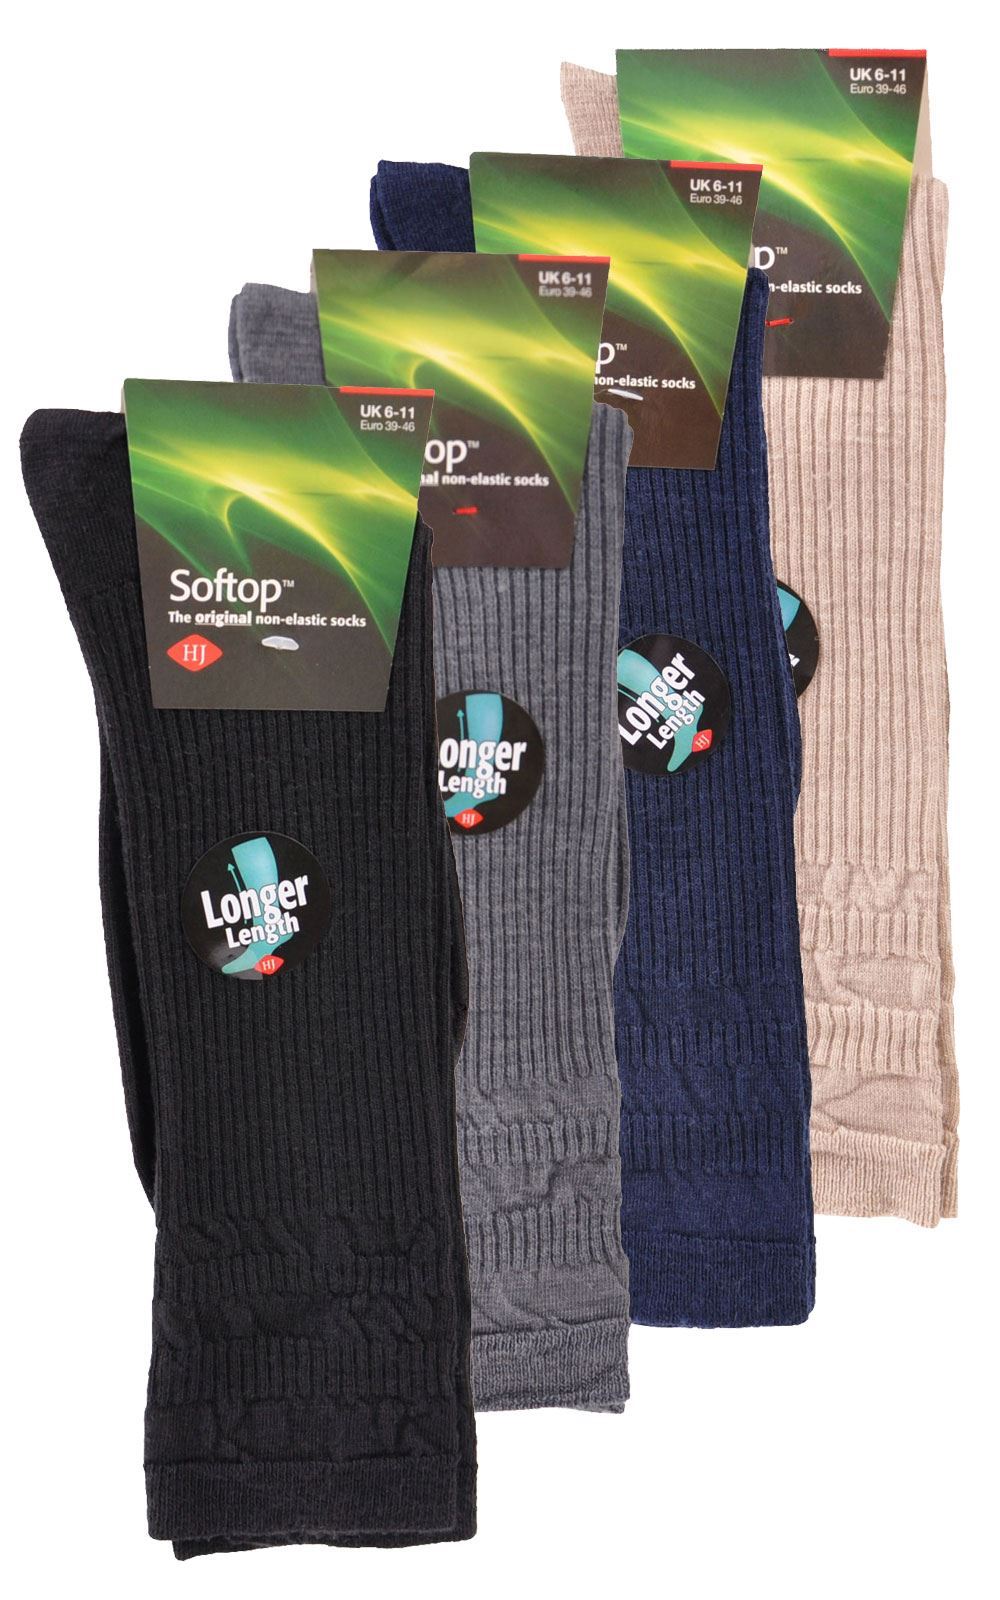 Picture of HJH Softop Socks HJ98